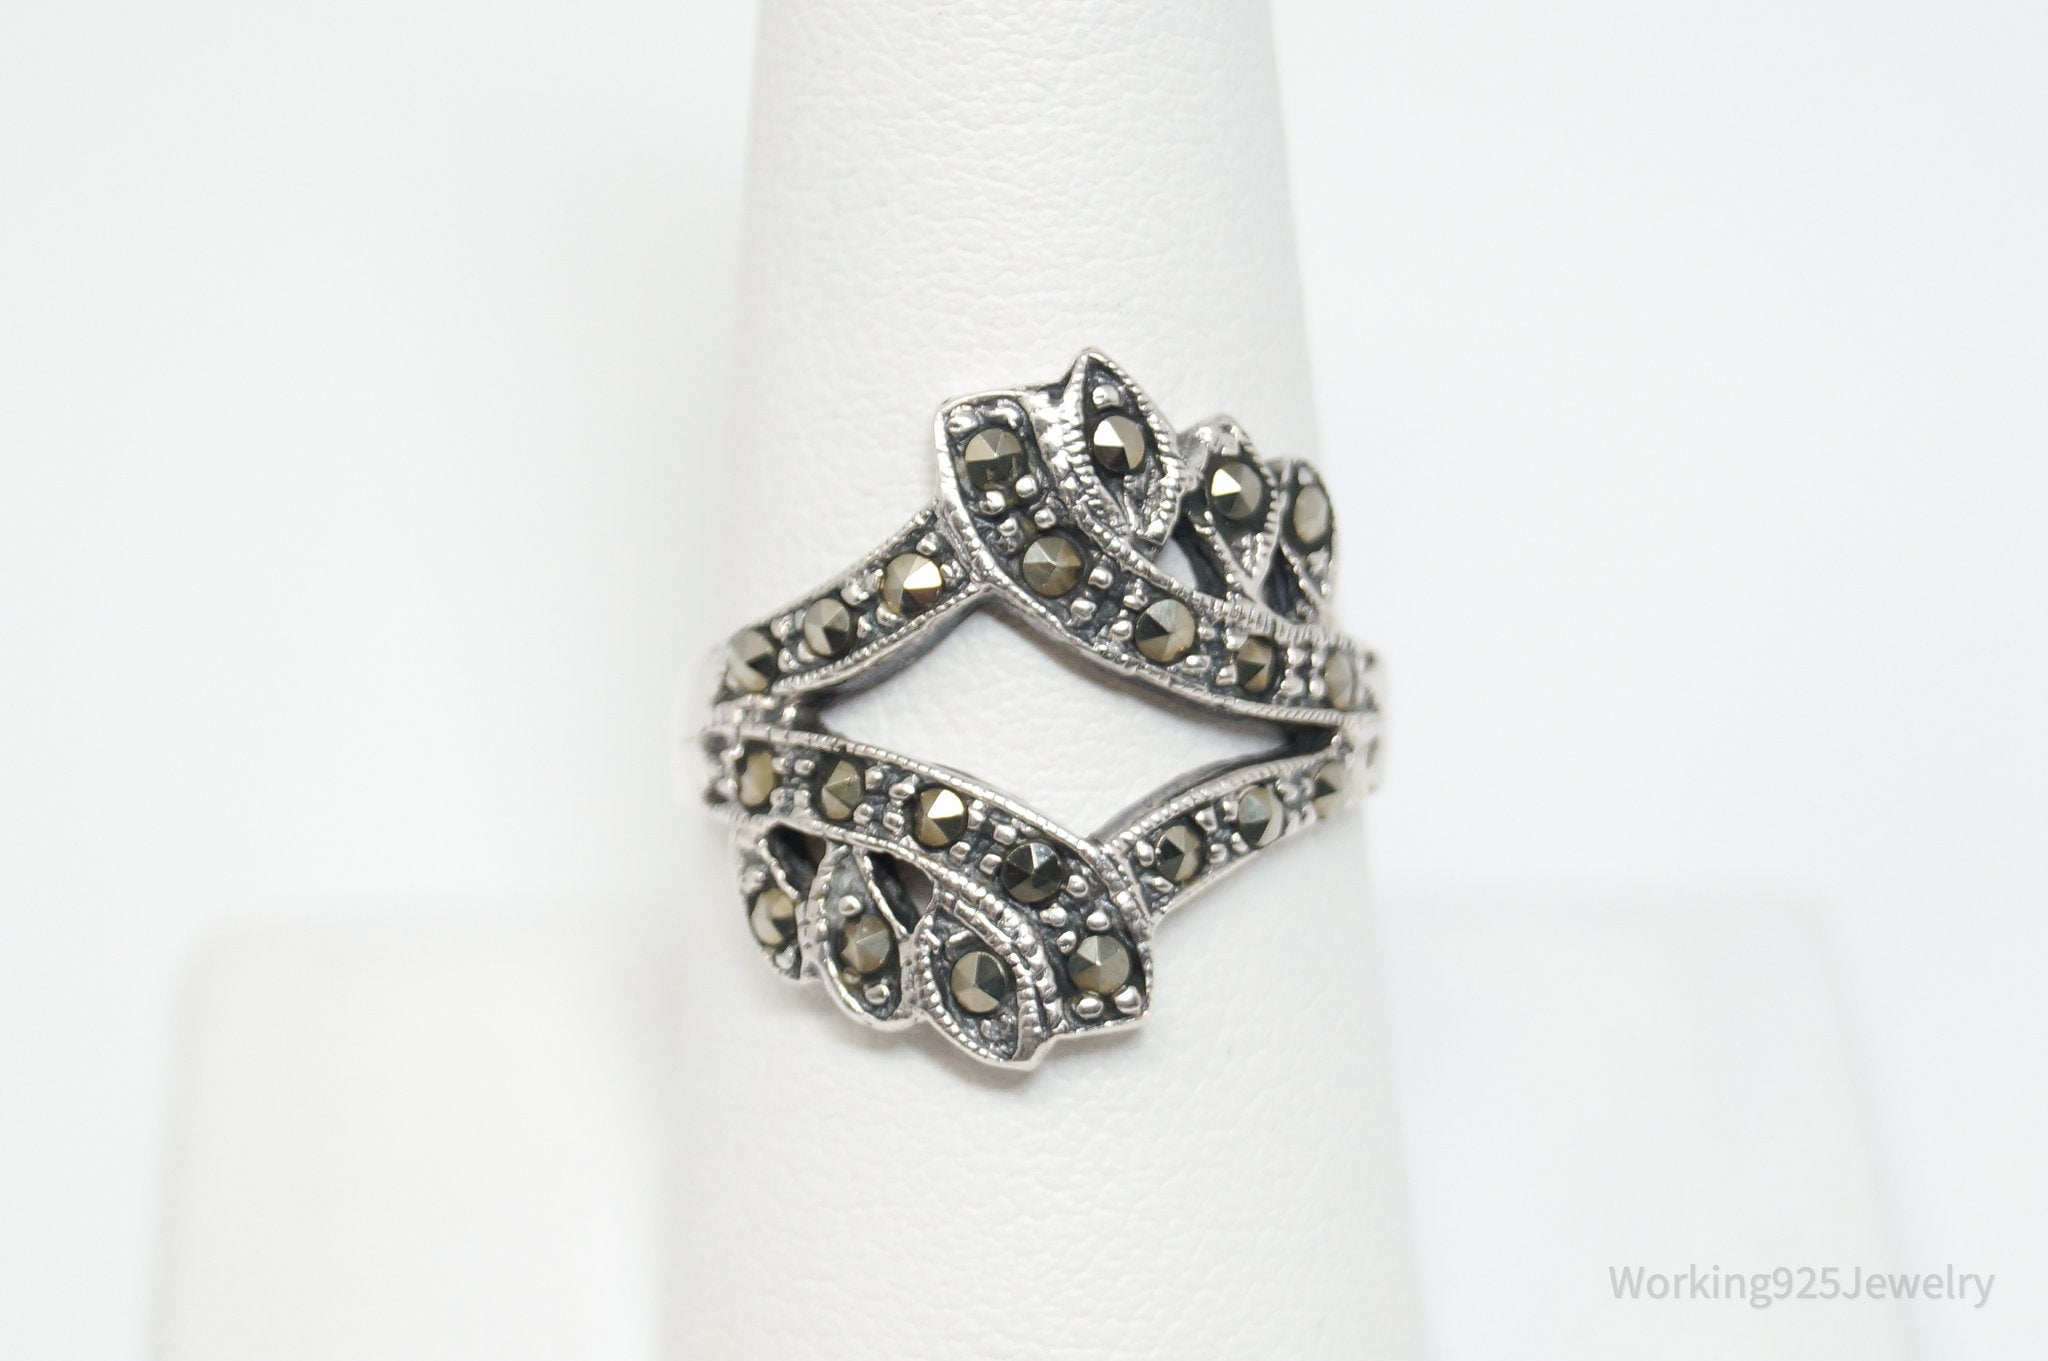 Vtg Art Deco Style Marcasite Ring Sterling Silver - Sz 8.75